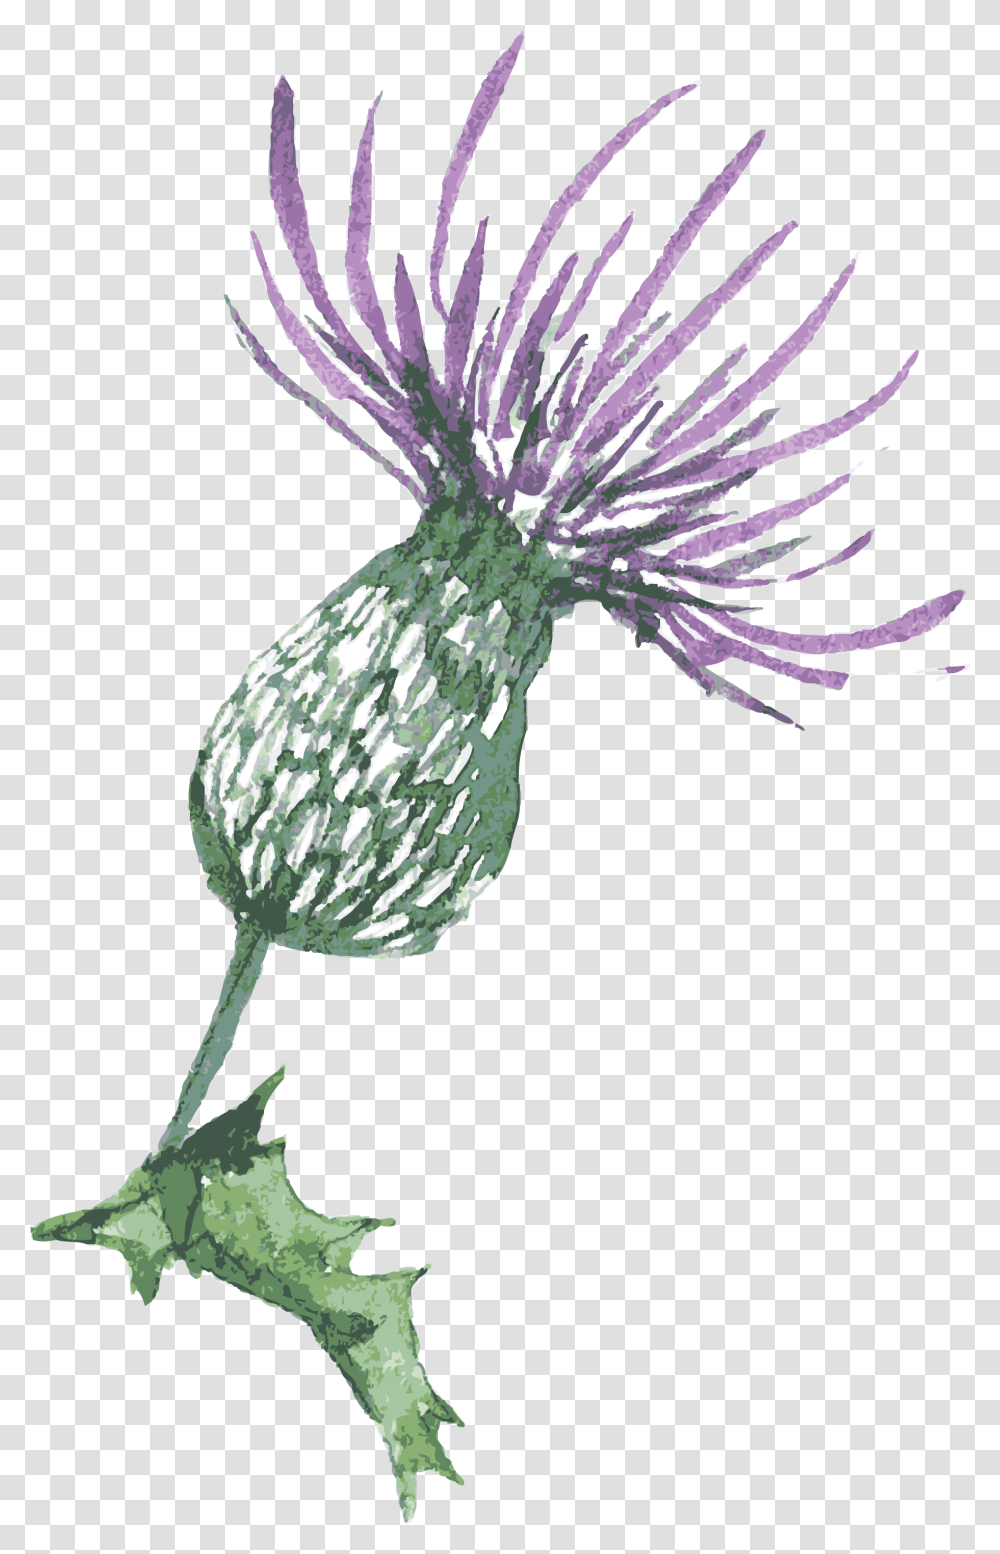 Download Free Blue Thistle Flowers Thistle Background, Plant, Anther, Bird, Animal Transparent Png